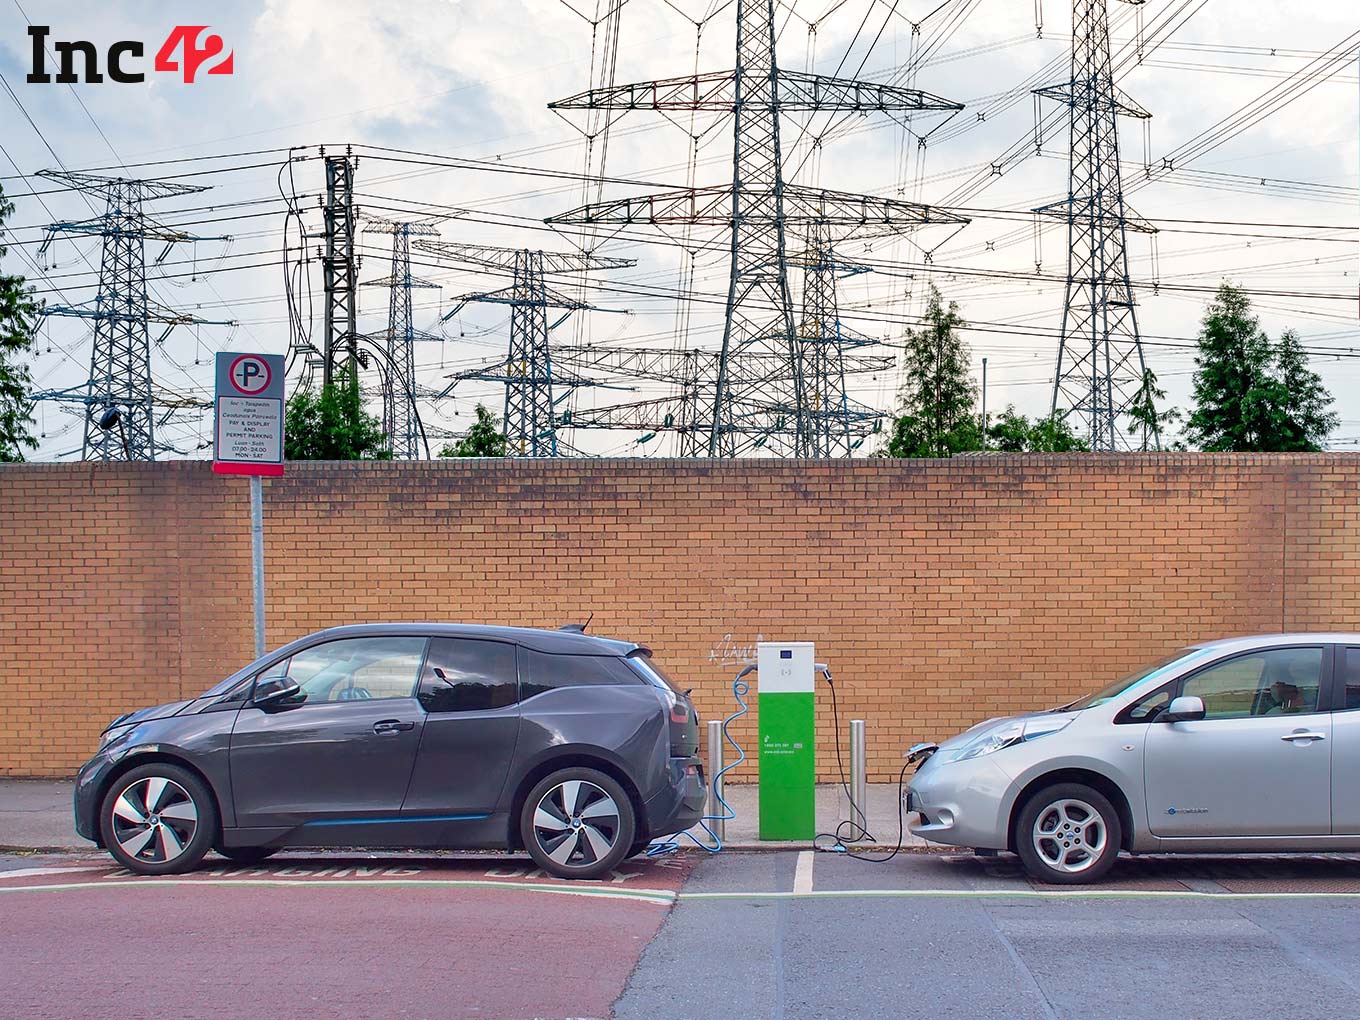 Will Electric Vehicles Impact Electricity Demand In India?